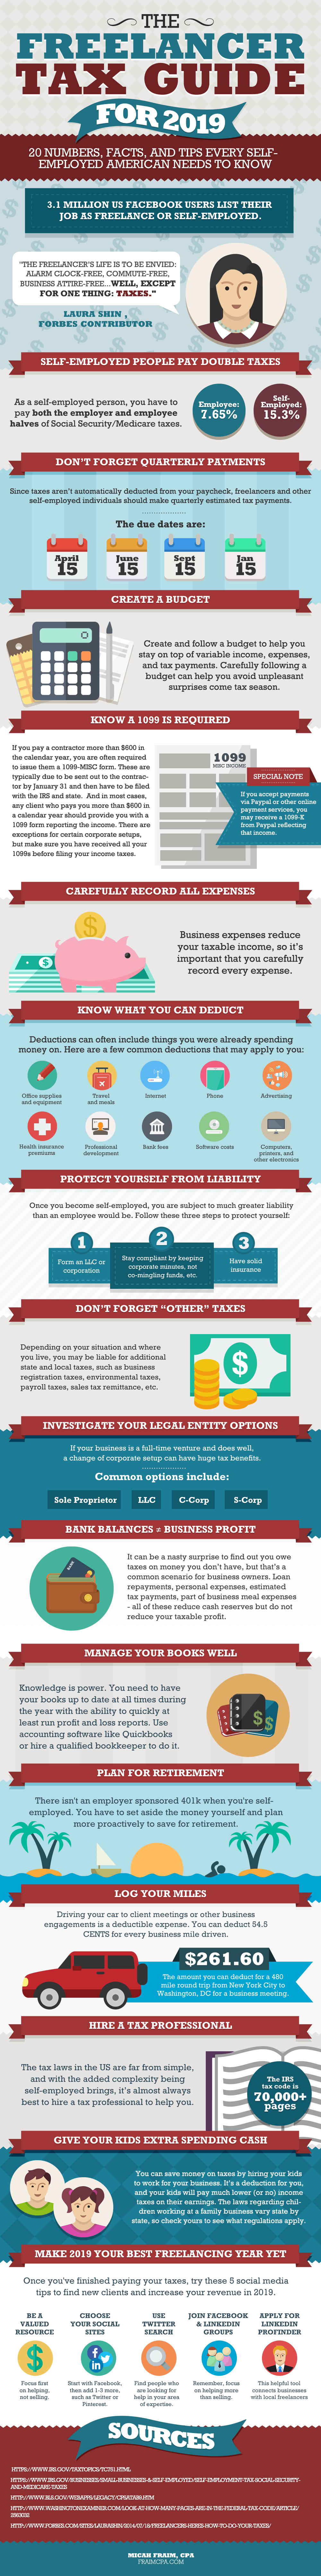 2019 freelancer tax guide infographic from fraim cawley cpa